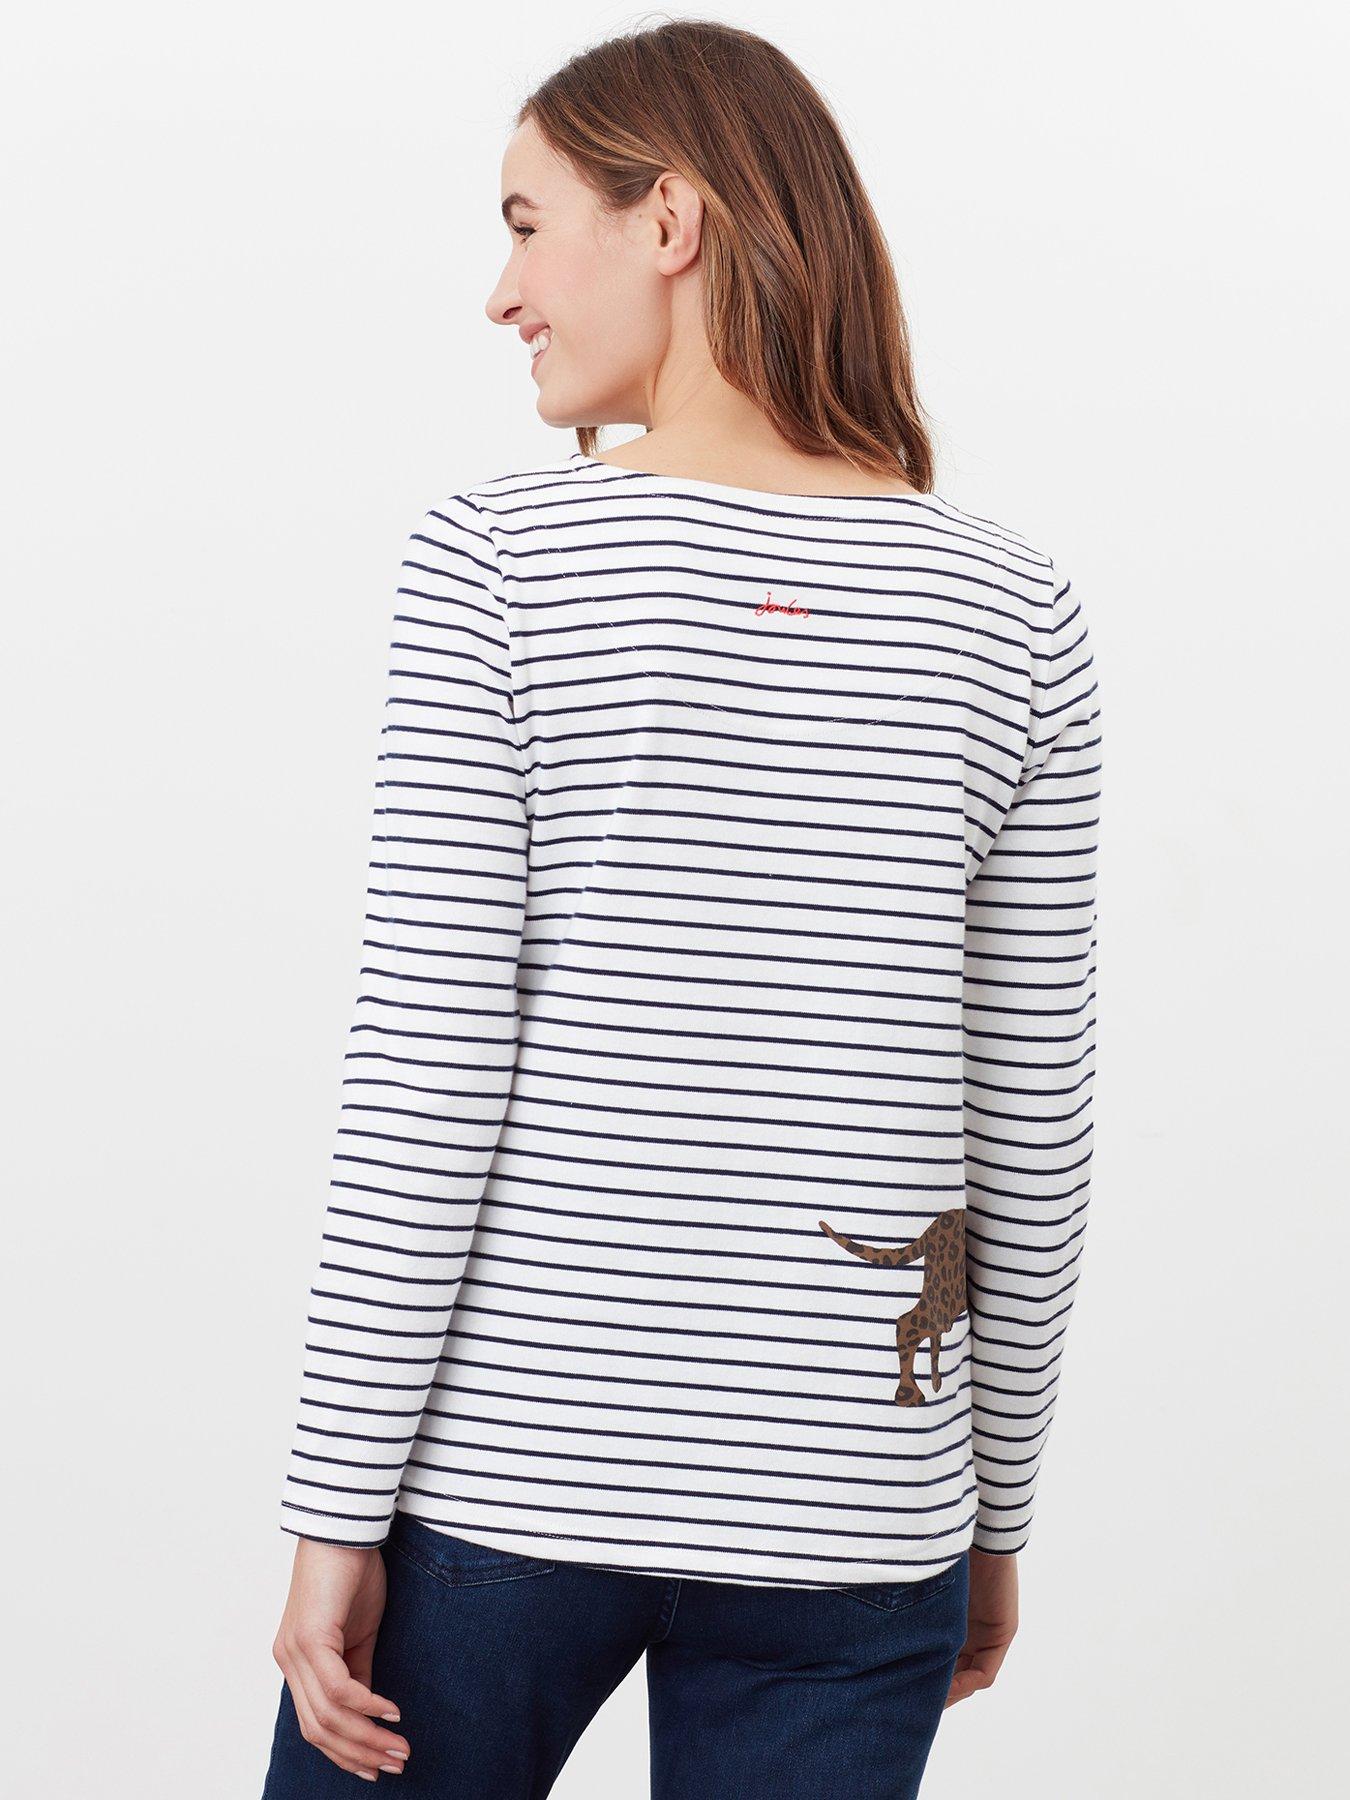 Tops & T-shirts Joules Harbour Sausage Dog Stripe Top - Cream/navy